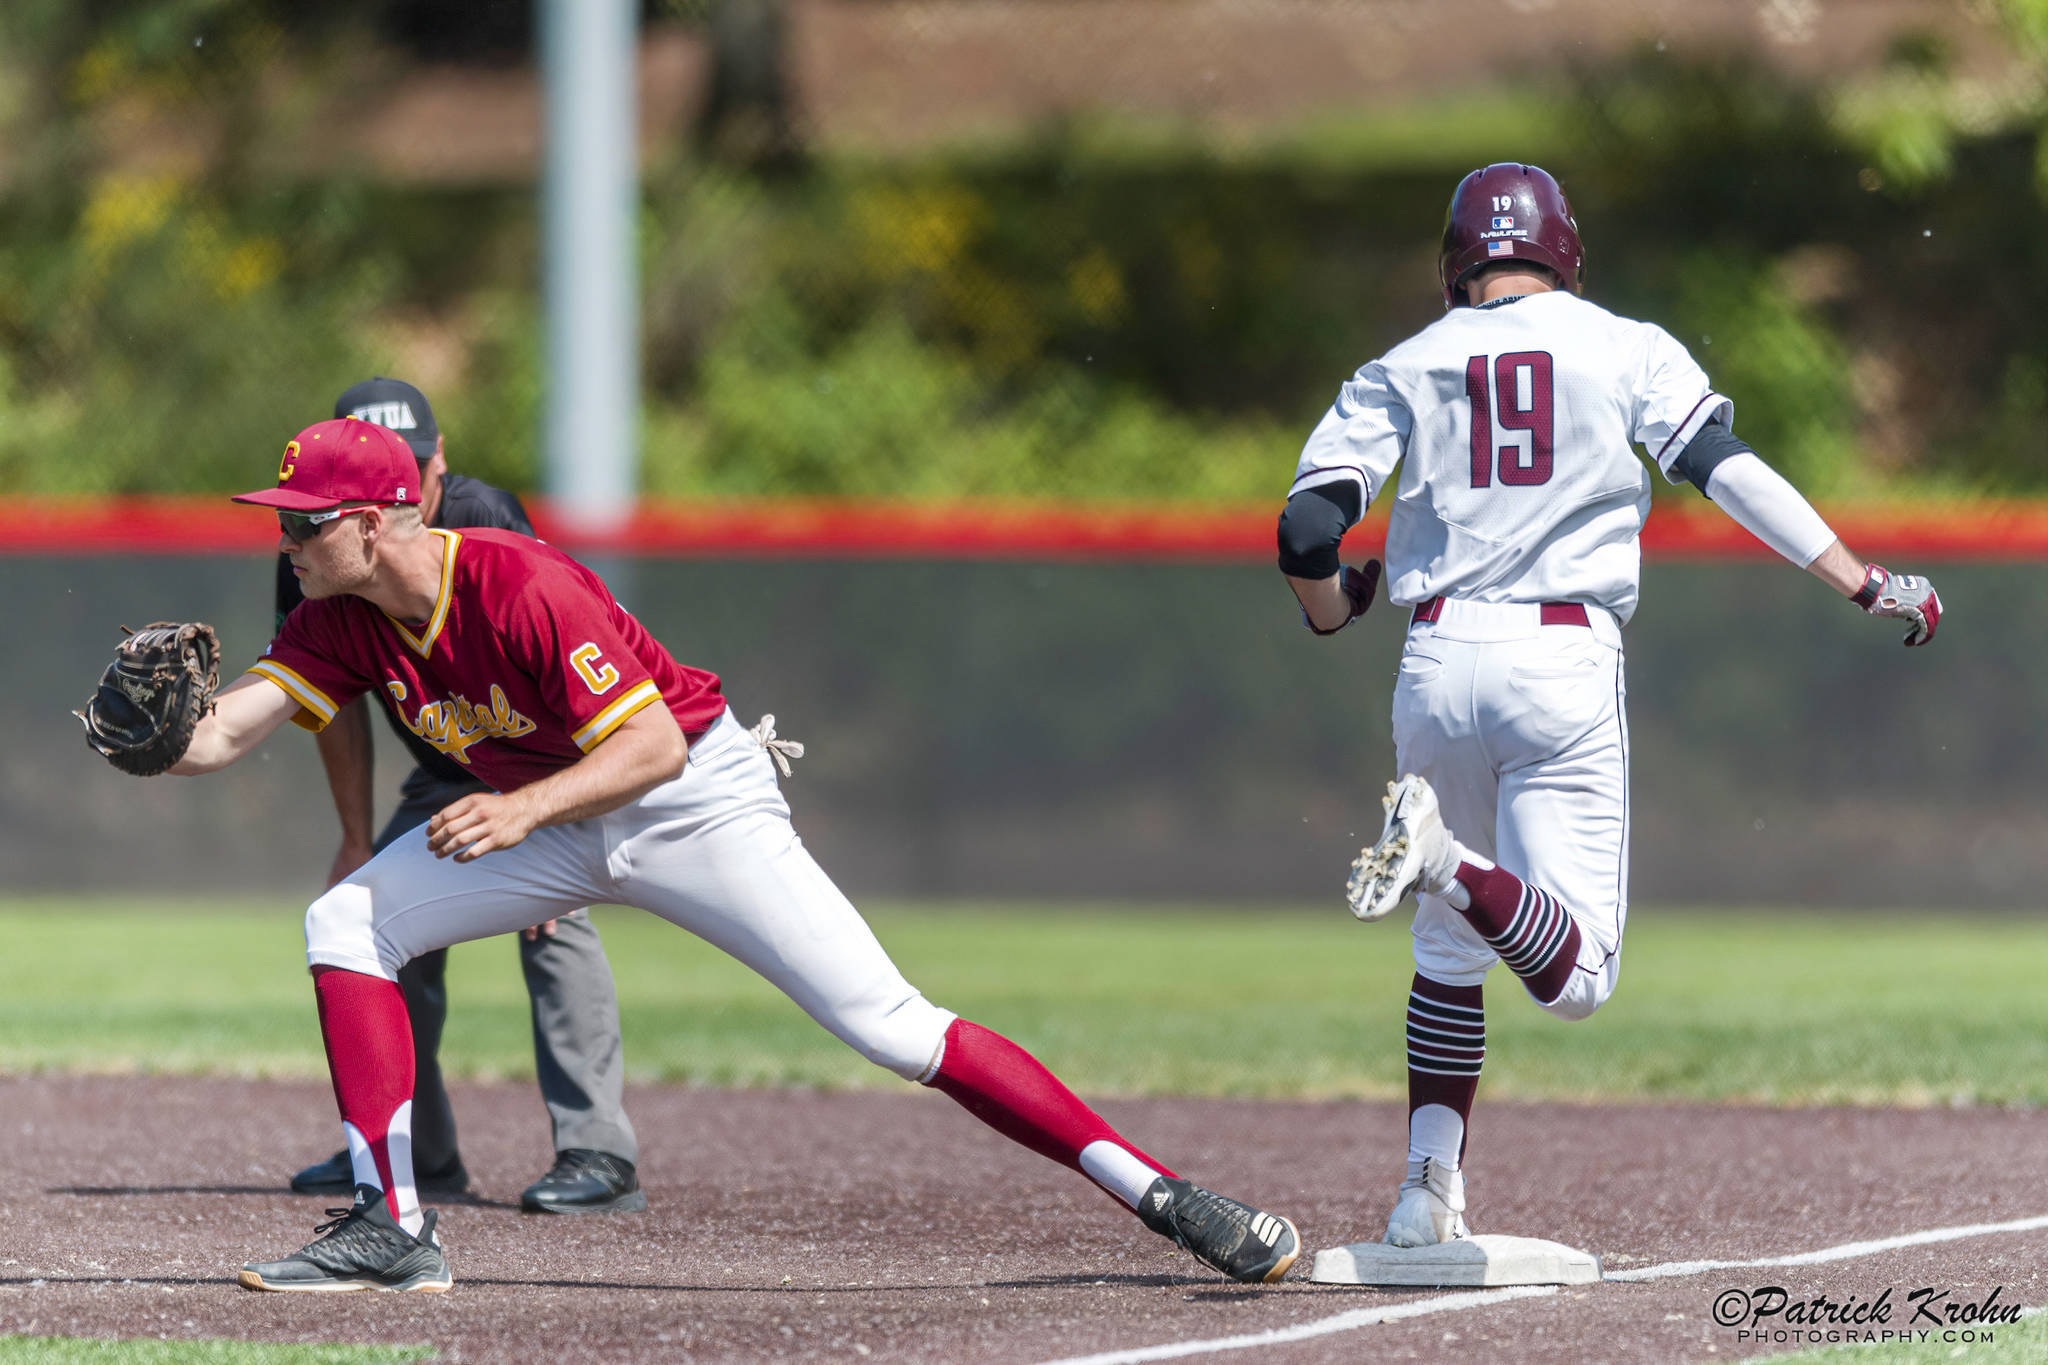 Mercer Island Islanders senior Grant Stading (No. 19) hustles down the first-base line after hitting a grounder against the Capital Cougars. Capital defeated Mercer Island, 7-1, in the first round of the 3A state playoffs. Photo courtesy of Patrick Krohn/Patrick Krohn Photography